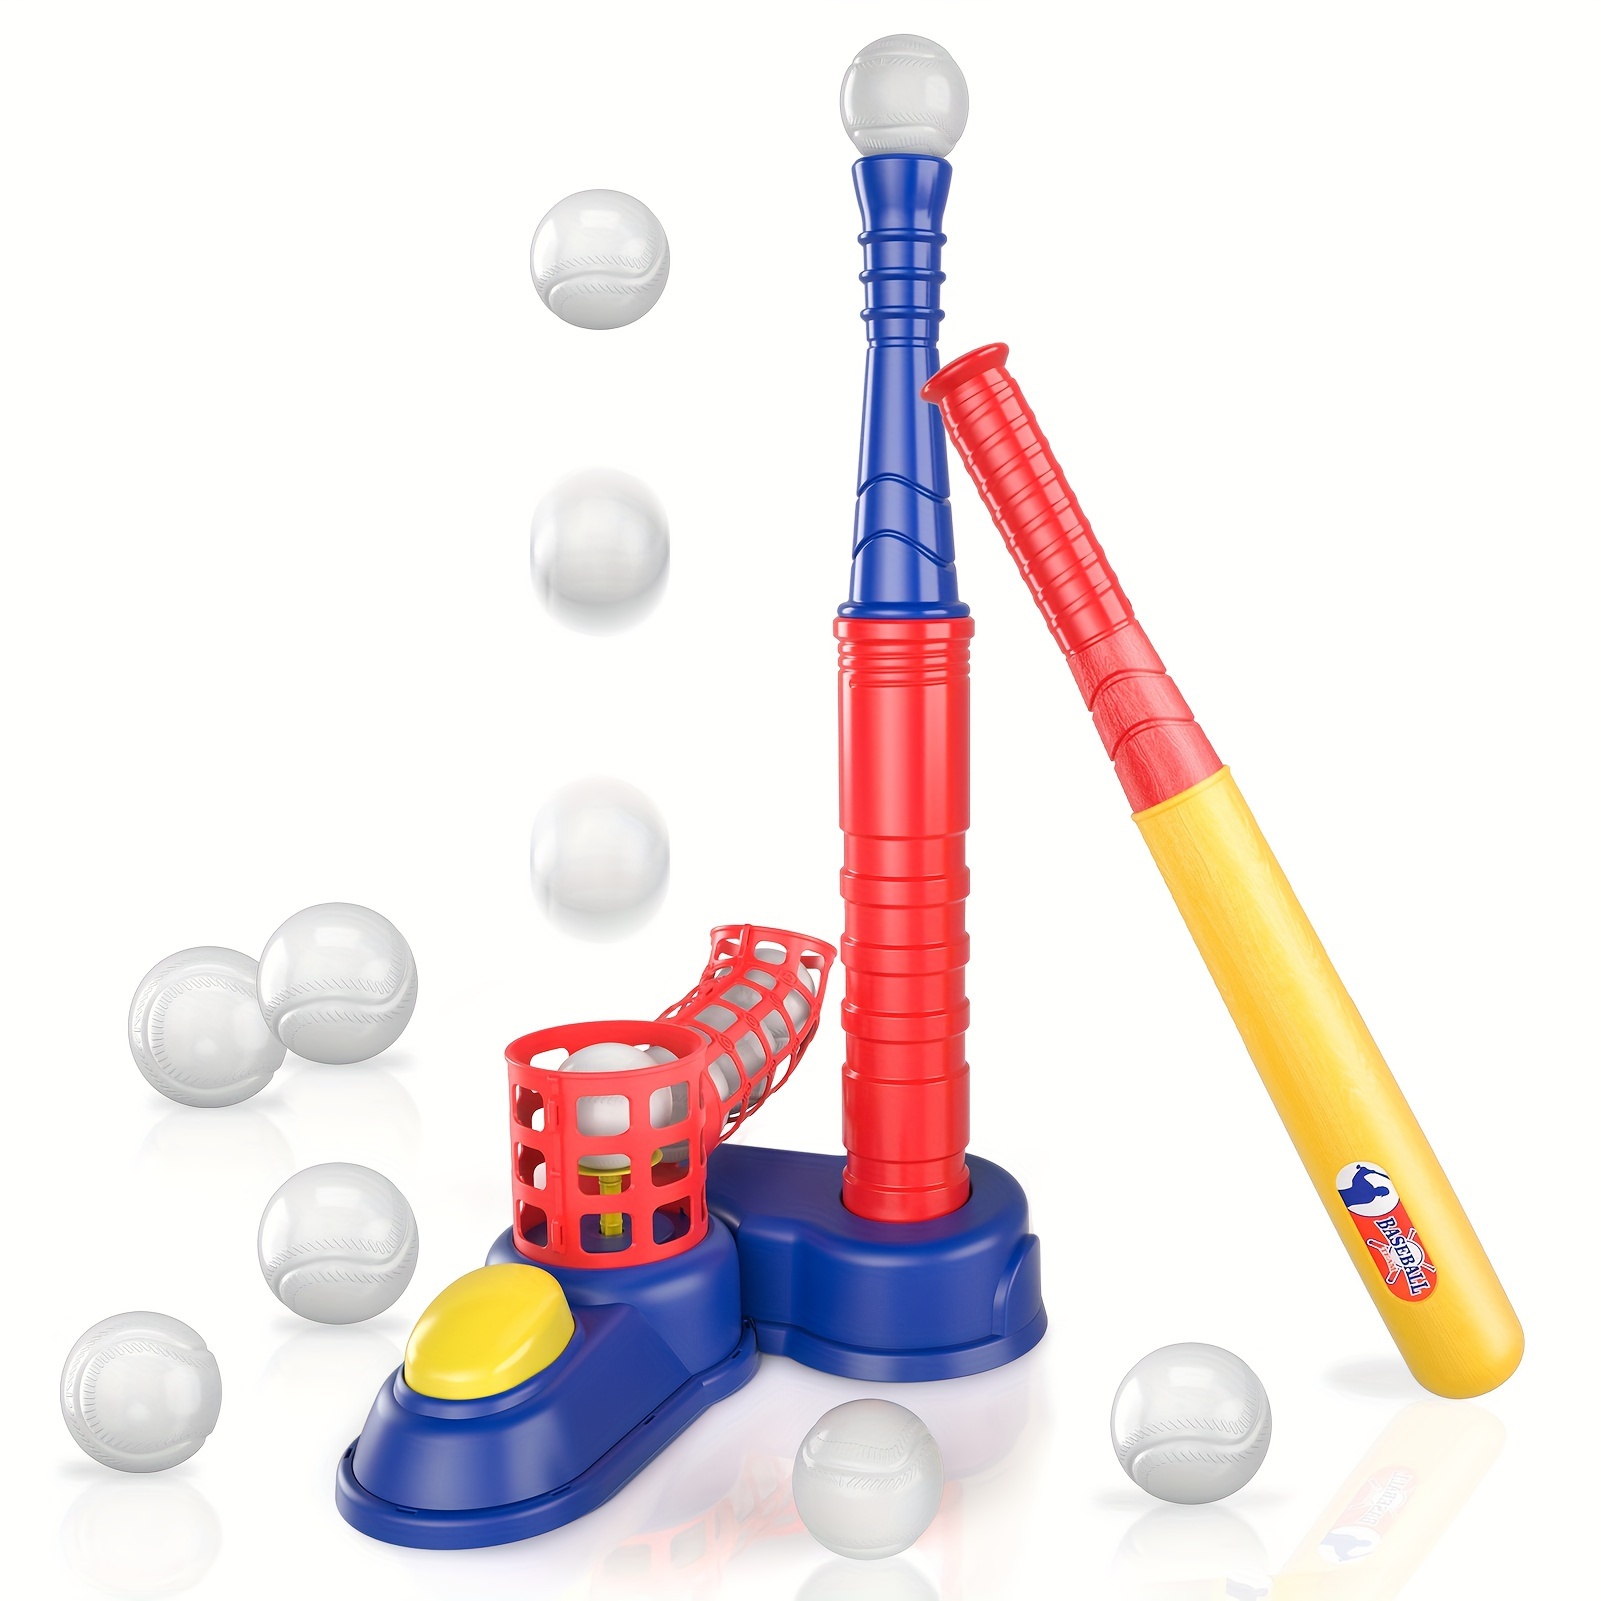 

T Ball Set Toys For Kids Boys 3-5 5-8, Kids Baseball Tee Toys Includes 10 Balls, Auto Ball Launcher, Outdoor Outside T-ball Set Sport Toys Birthday Gifts For 3 4 5 6 Year Old Boys Kids